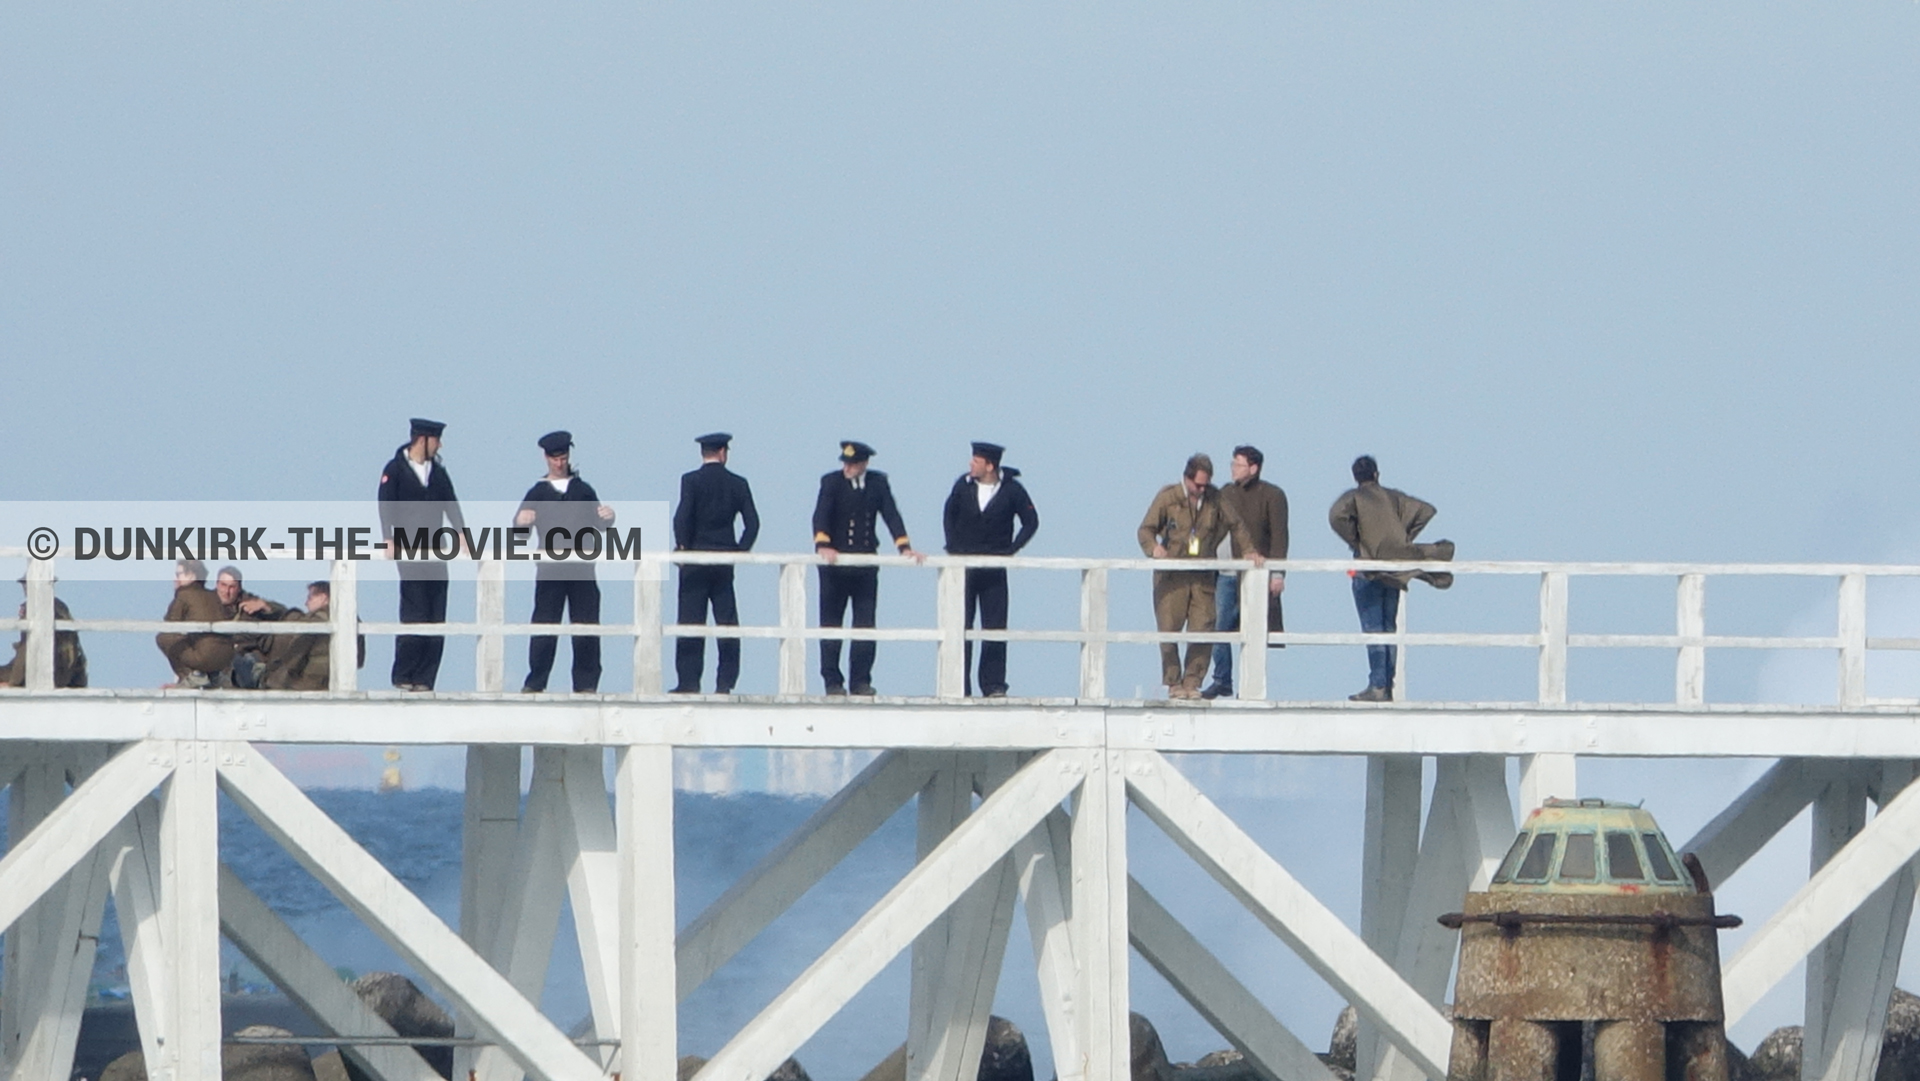 Picture with blue sky, supernumeraries, white smoke, EST pier, technical team,  from behind the scene of the Dunkirk movie by Nolan